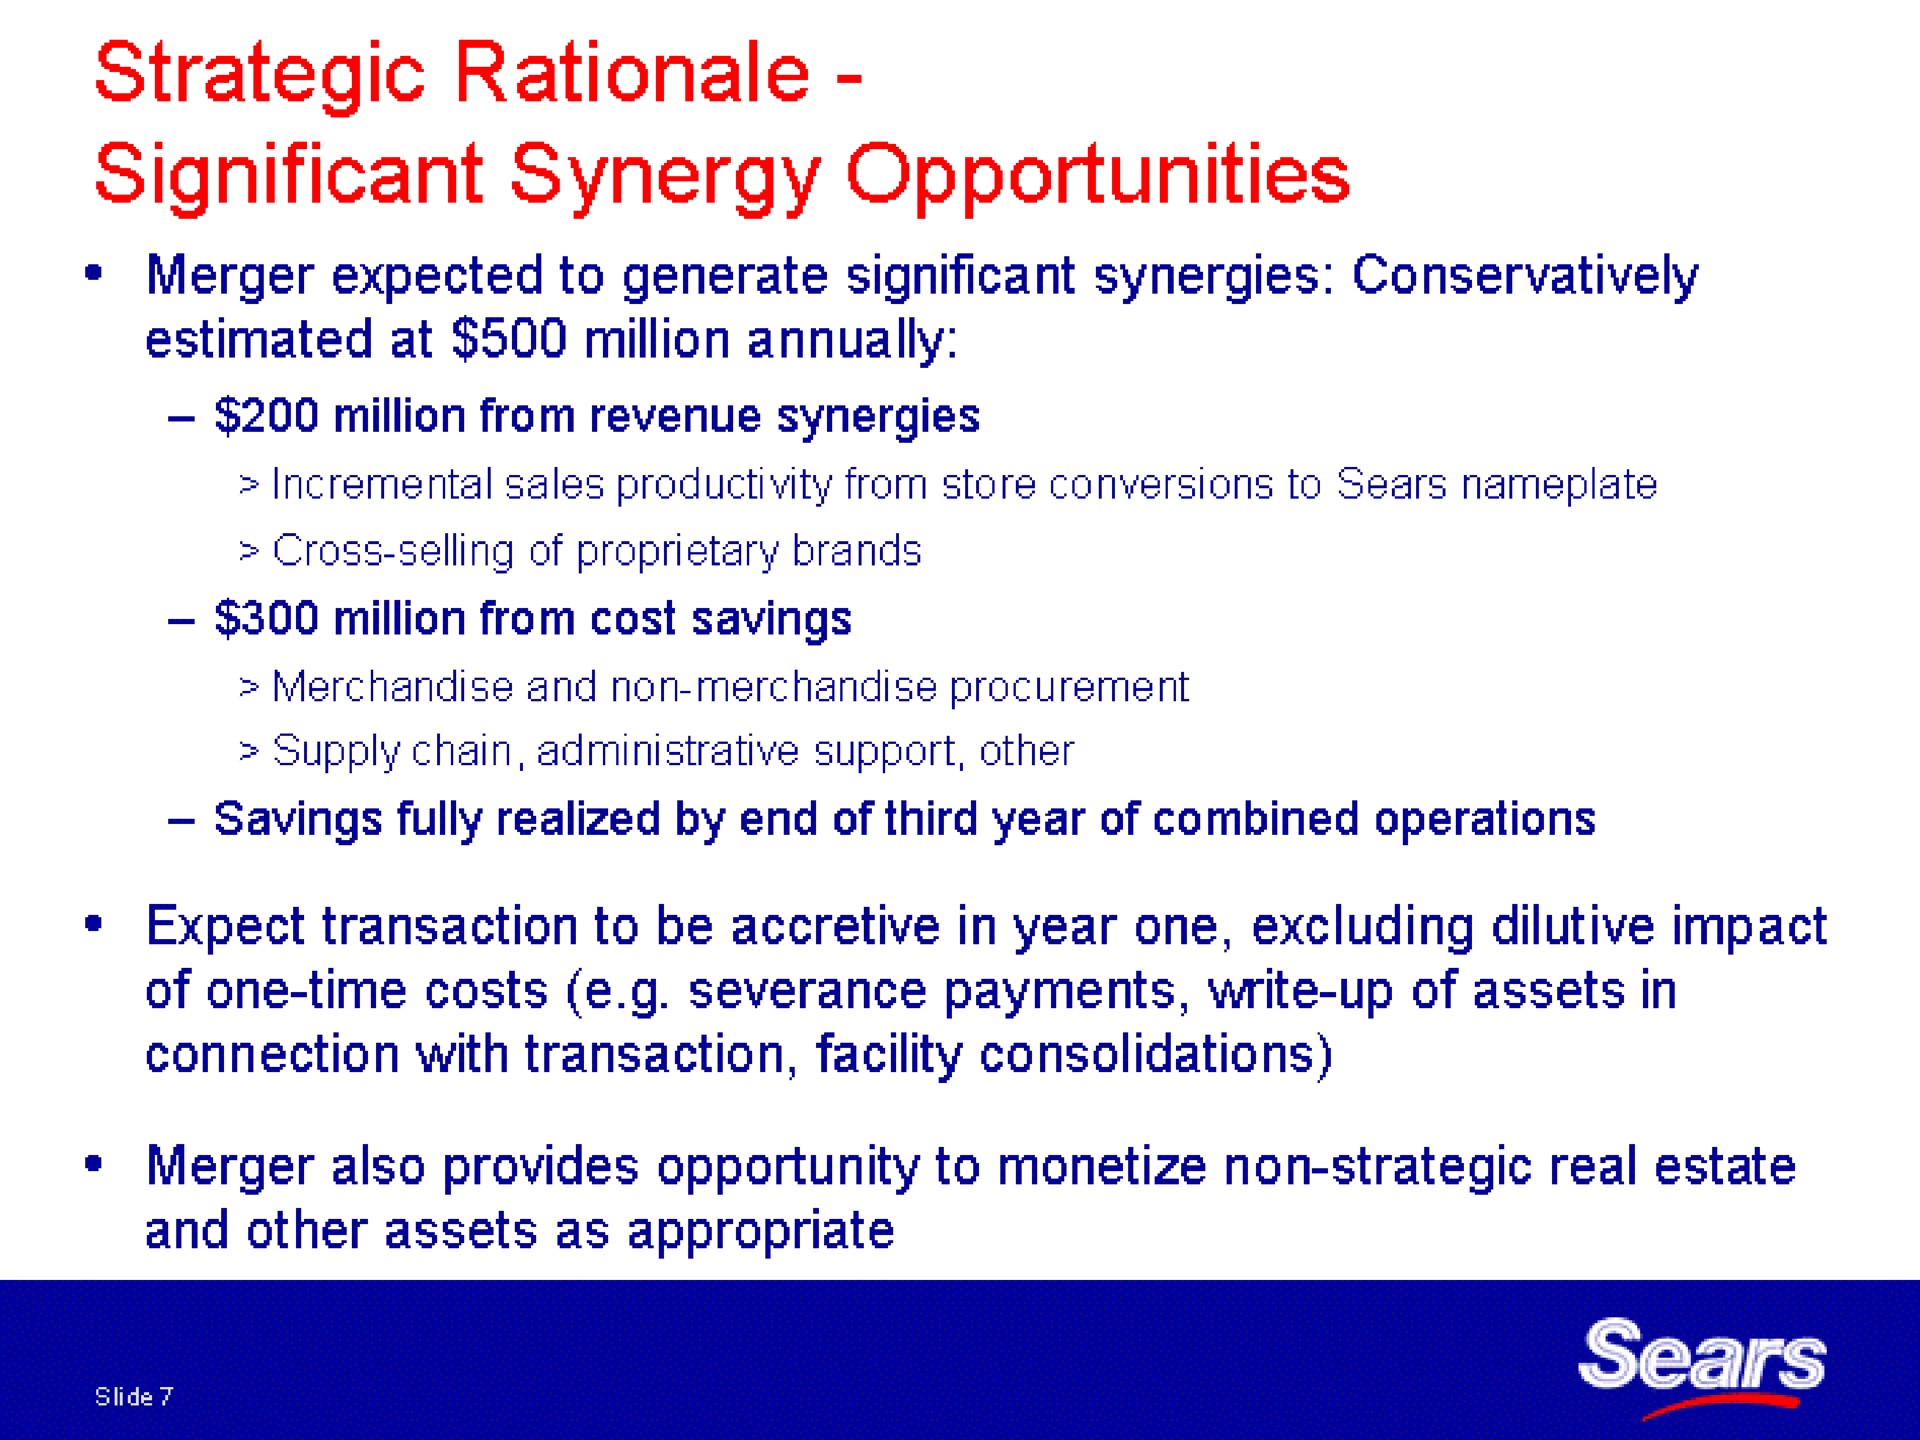 rationale significant synergy opportunities | Sears